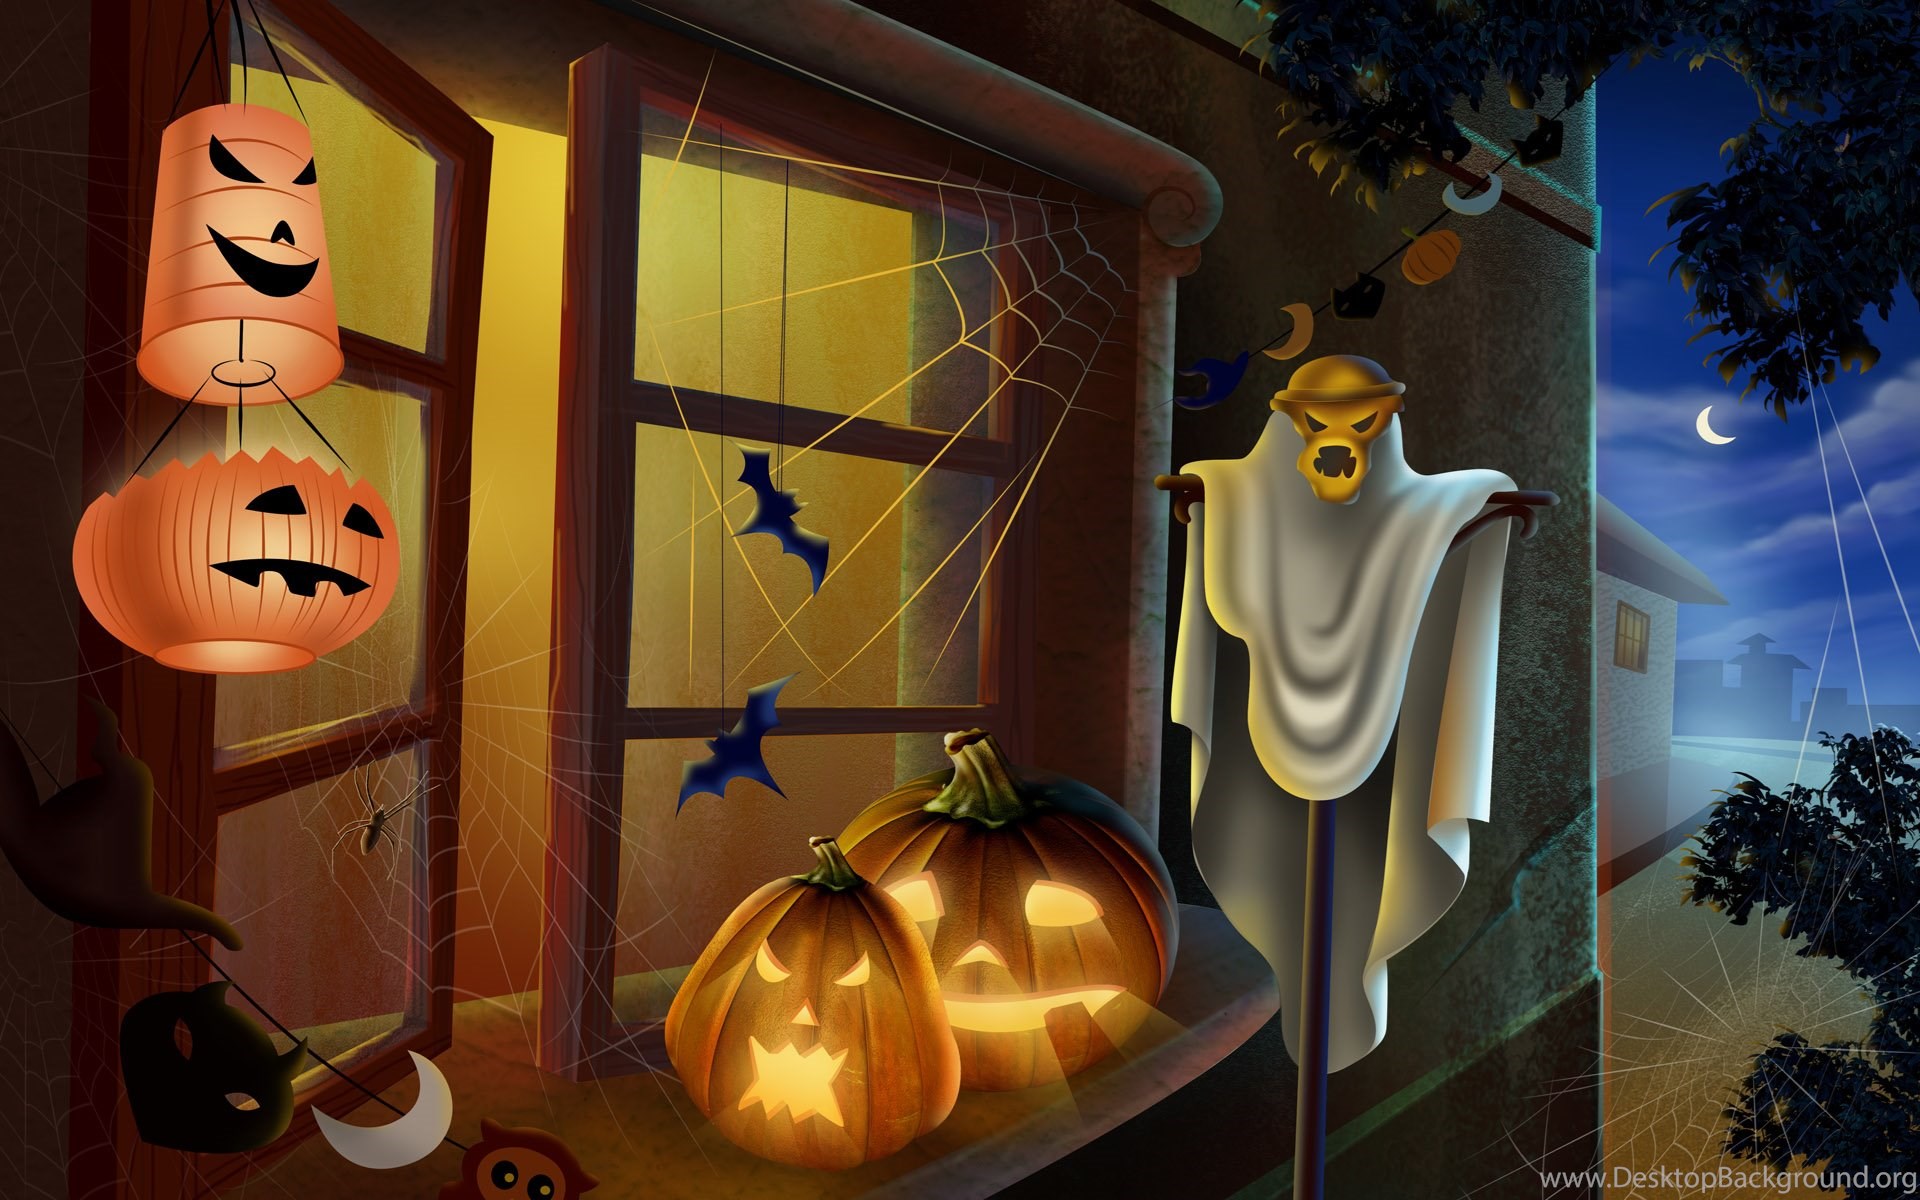 DH Wallpaper Photo Of Free Animated Halloween Background: By. Desktop Background